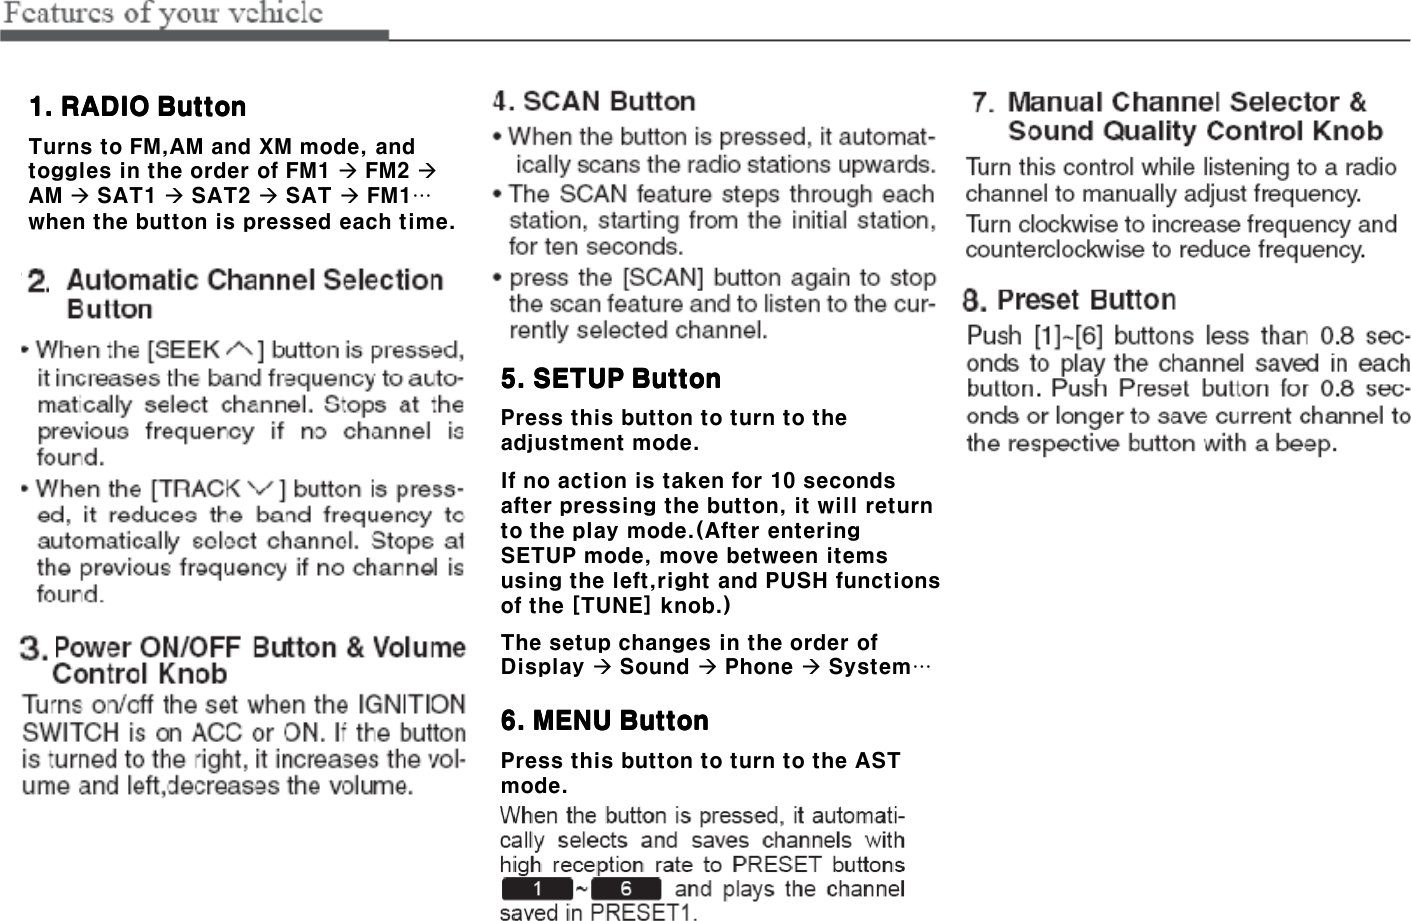 1. RADIO Button1. RADIO Button1. RADIO Button1. RADIO ButtonTurns to FM,AM and XM mode, and toggles in the order of FM1 FM2 AM SAT1 SAT2 SAT FM1…when the button is pressed each time.5. SETUP Button5. SETUP Button5. SETUP Button5. SETUP ButtonPress this button to turn to the adjustment mode.If no action is taken for 10 seconds after pressing the button, it will return to the play mode.(After entering SETUP mode, move between items using the left,right and PUSH functions of the [TUNE] knob.)The setup changes in the order of Display Sound Phone System…6. MENU Button6. MENU Button6. MENU Button6. MENU ButtonPress this button to turn to the AST mode.